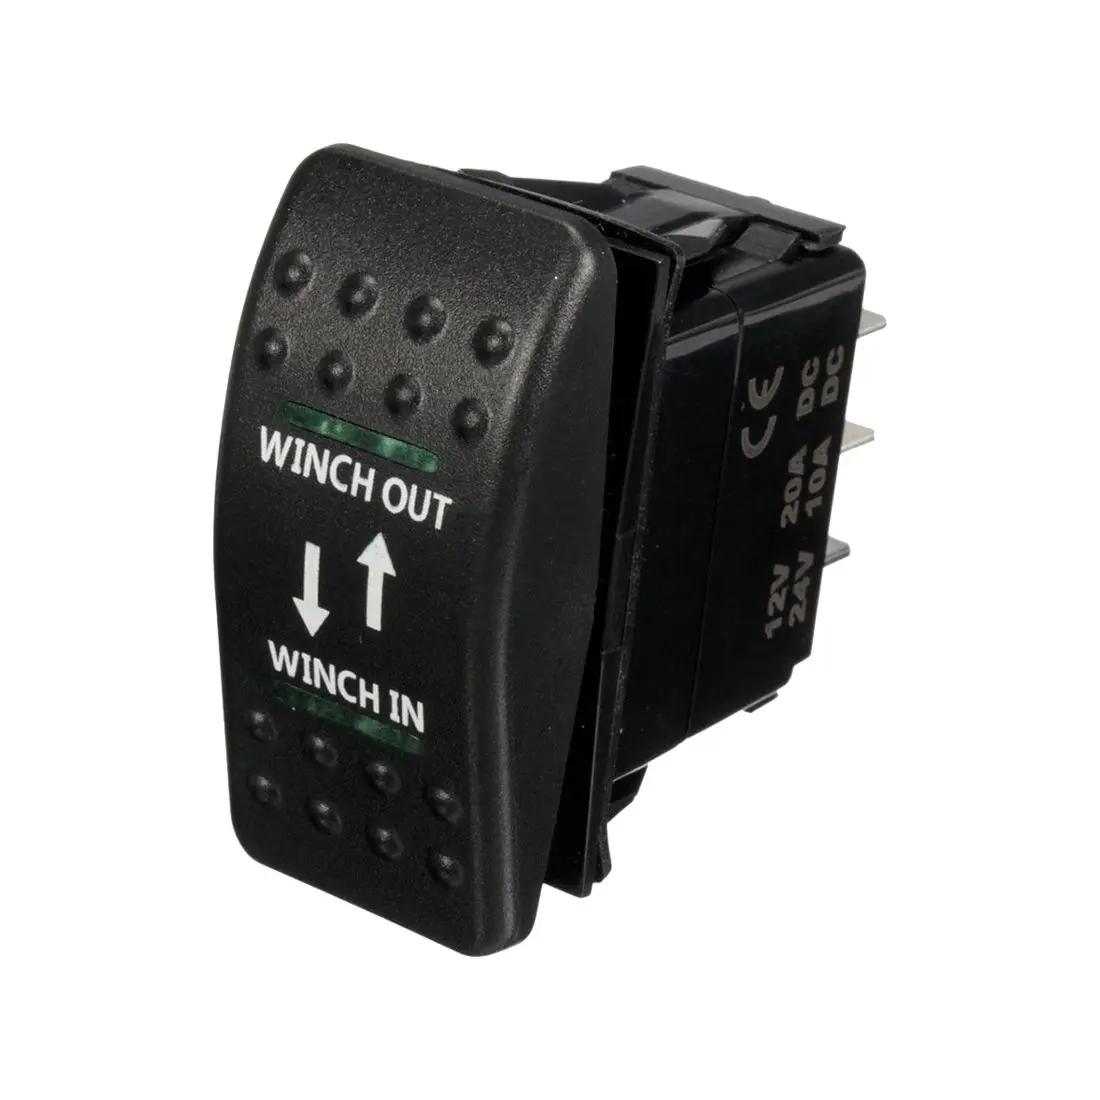 

12V 20A Winch In Winch Out ON-OFF-ON Rocker Switch 7 Pin LED green